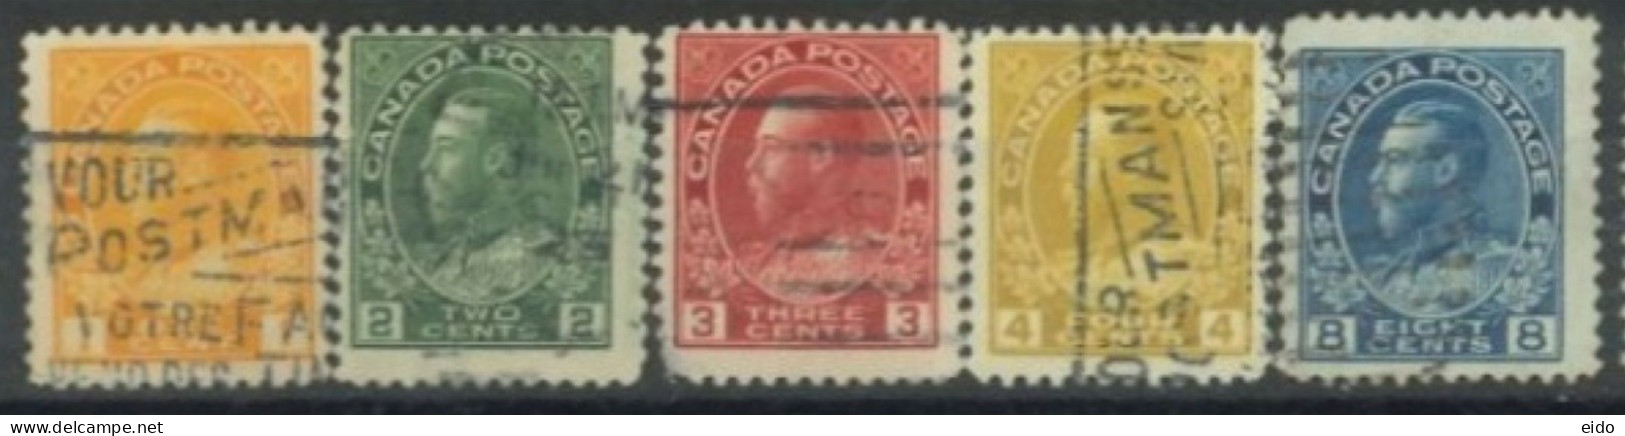 CANADA - 1922, KING GEORGE V STAMPS SET OF 5, USED. - Gebraucht